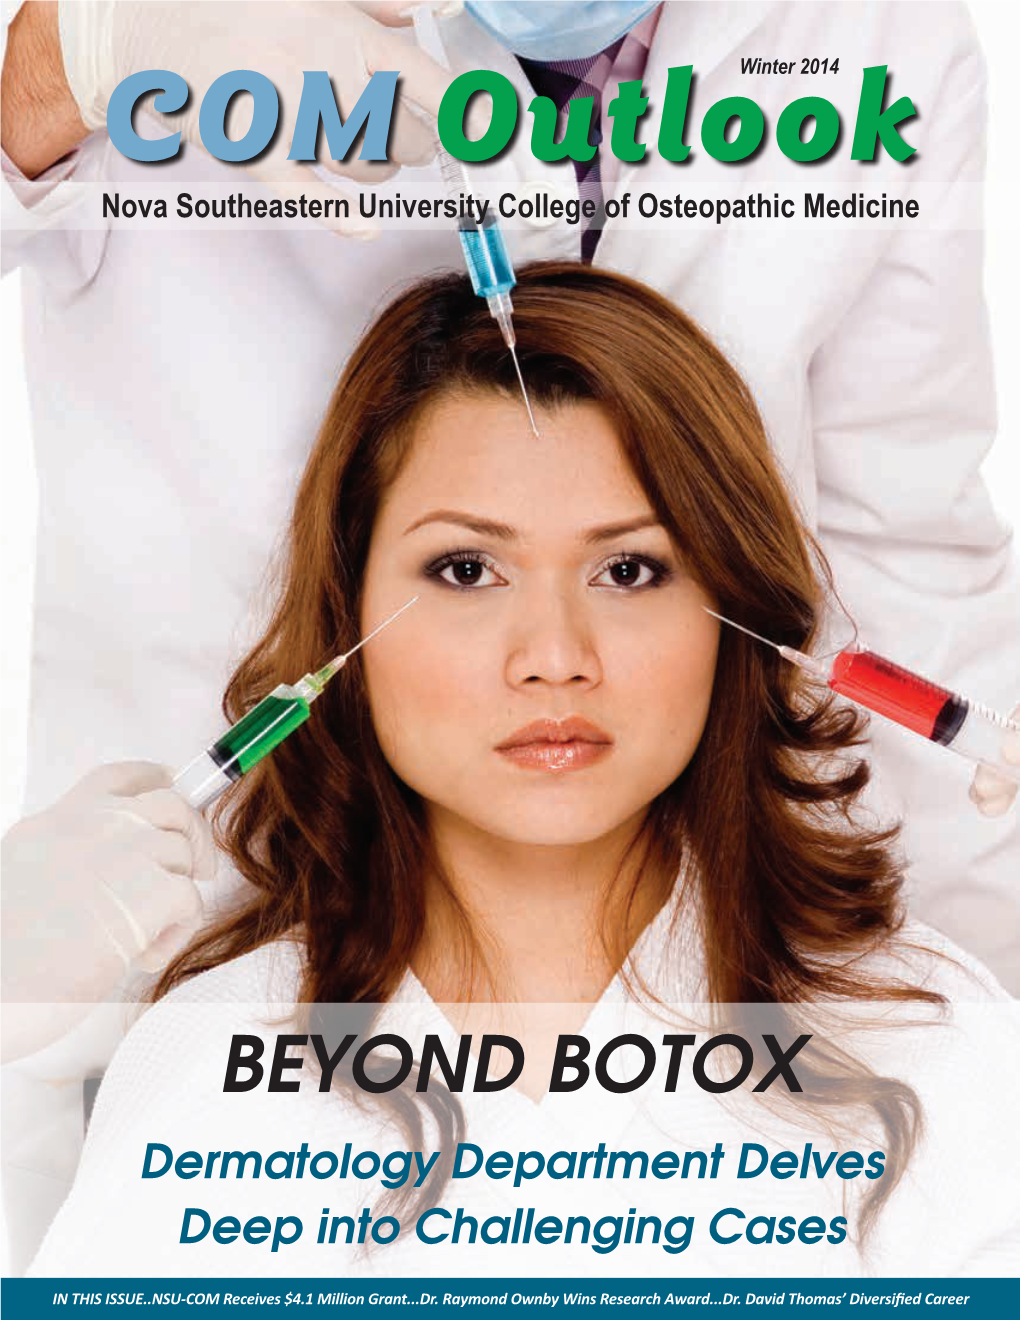 BEYOND BOTOX Dermatology Department Delves Deep Into Challenging Cases